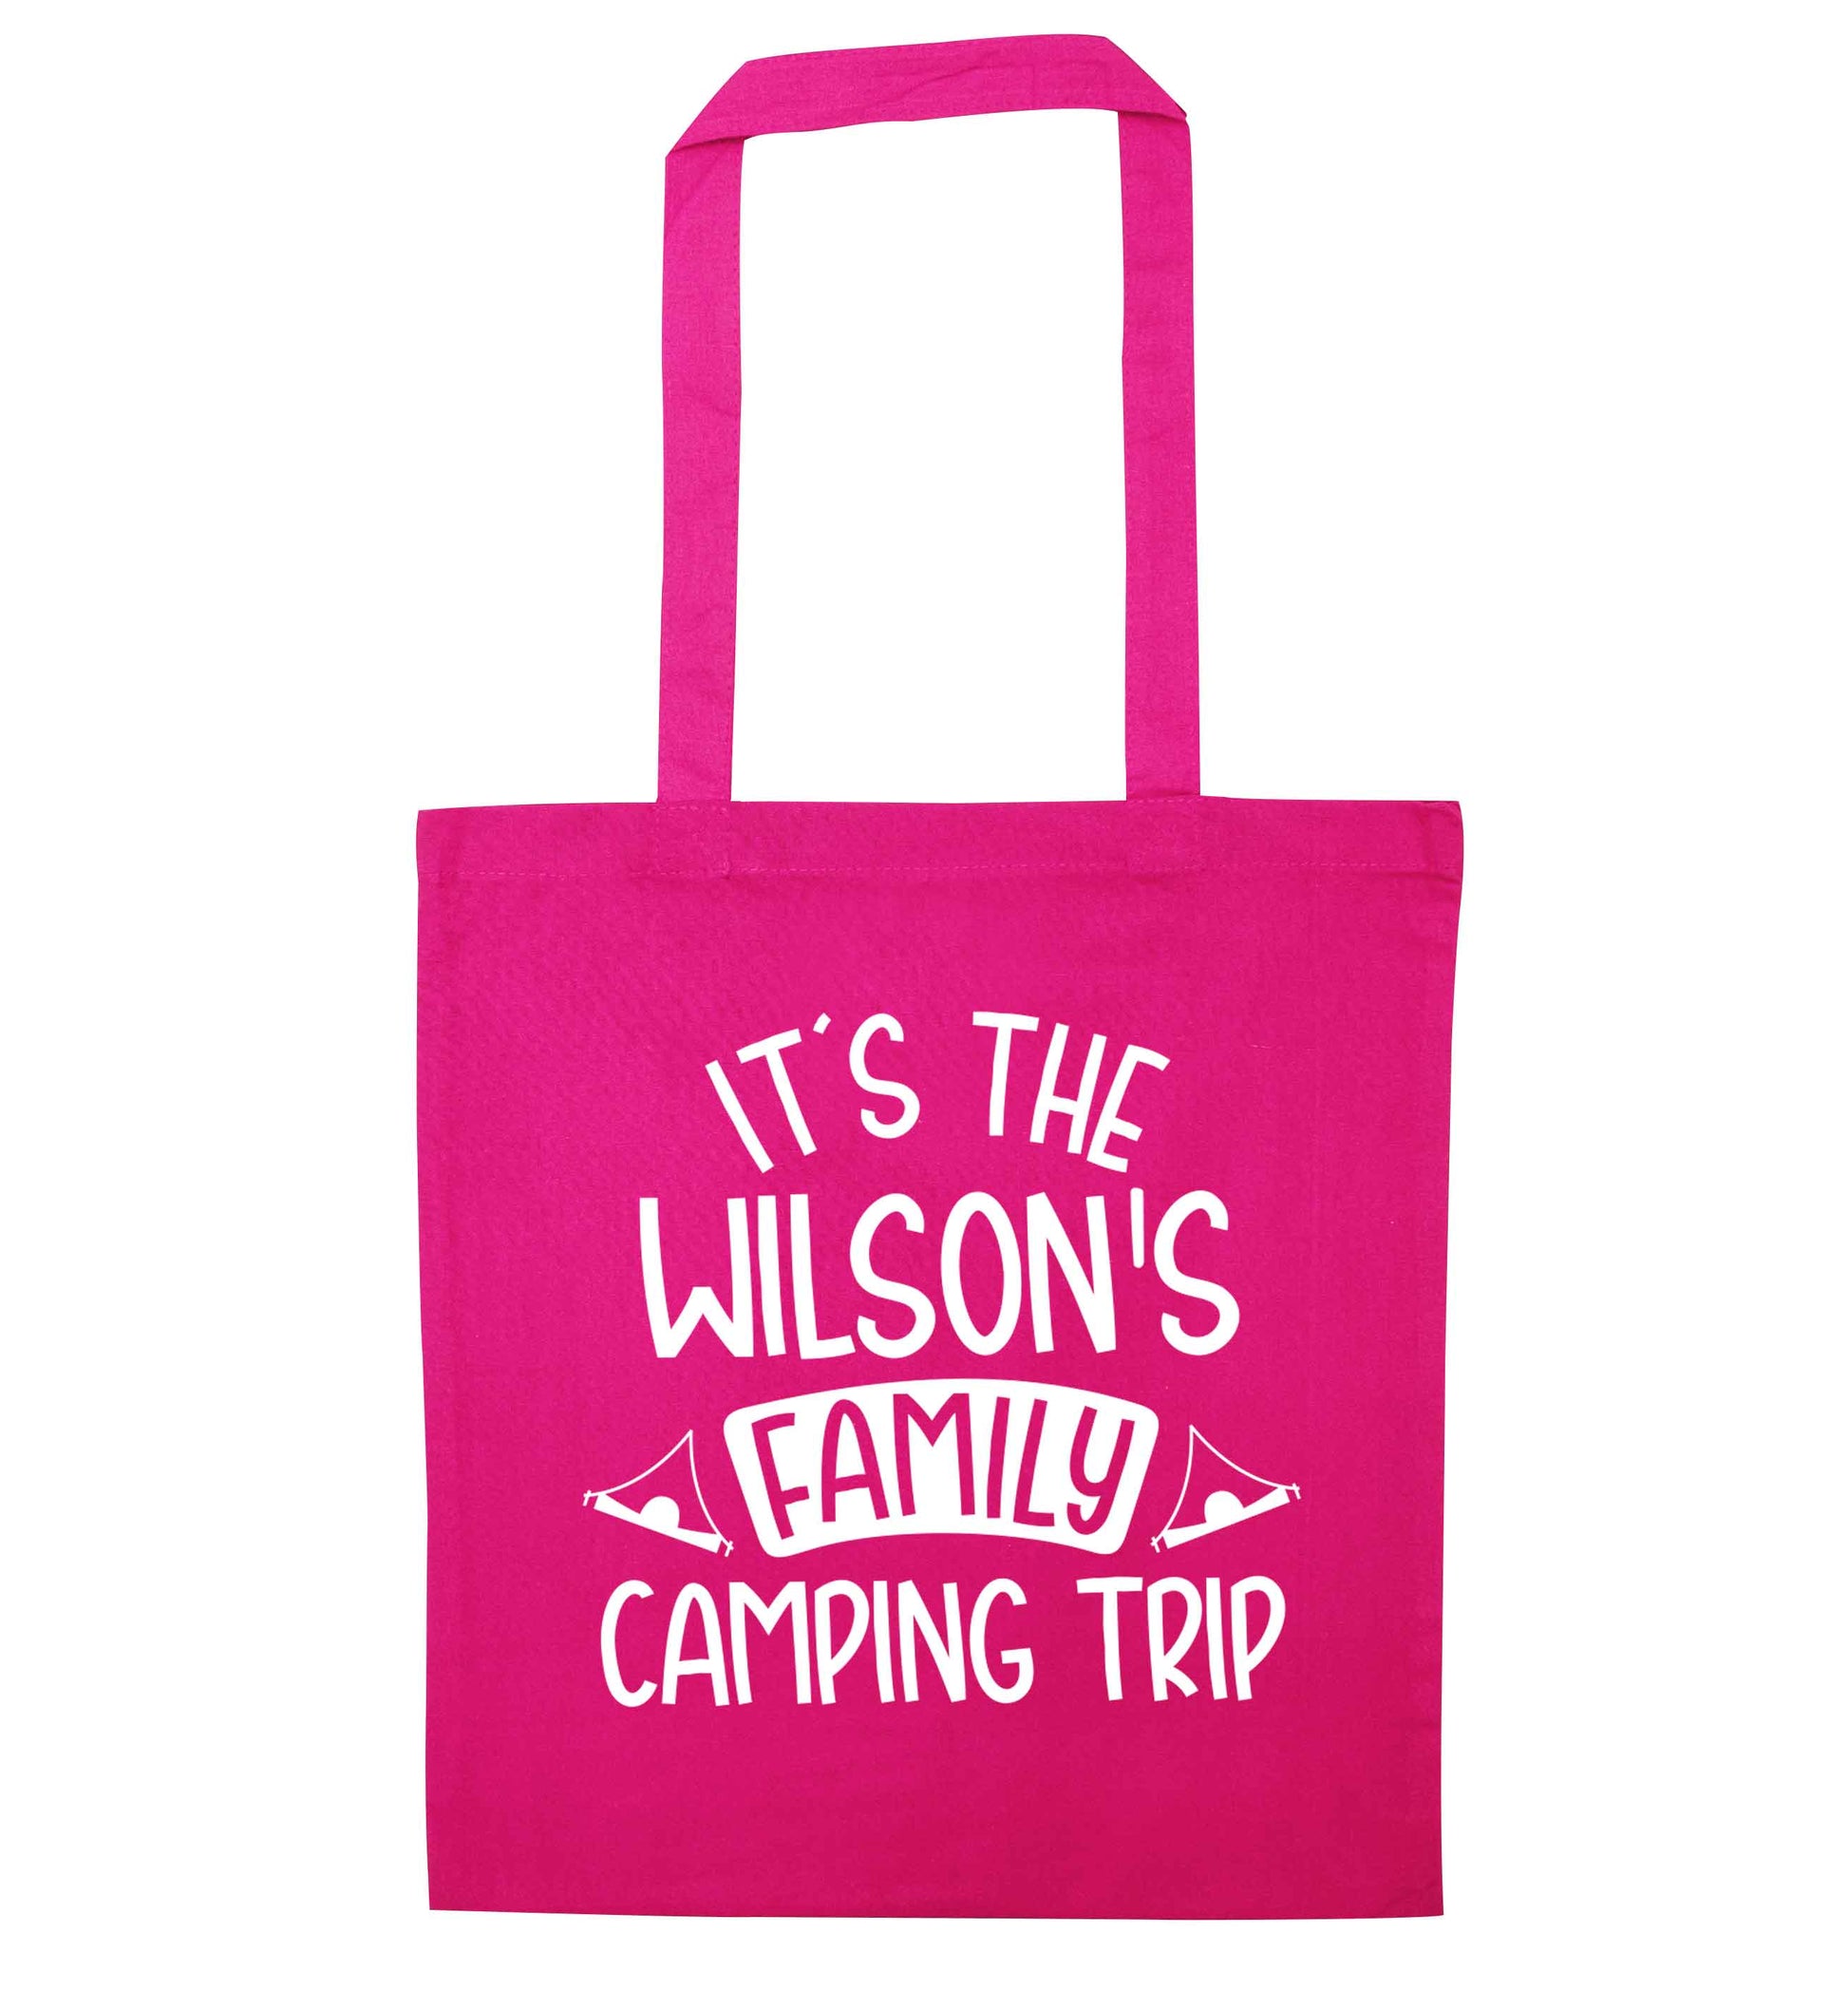 It's the Wilson's family camping trip personalised pink tote bag